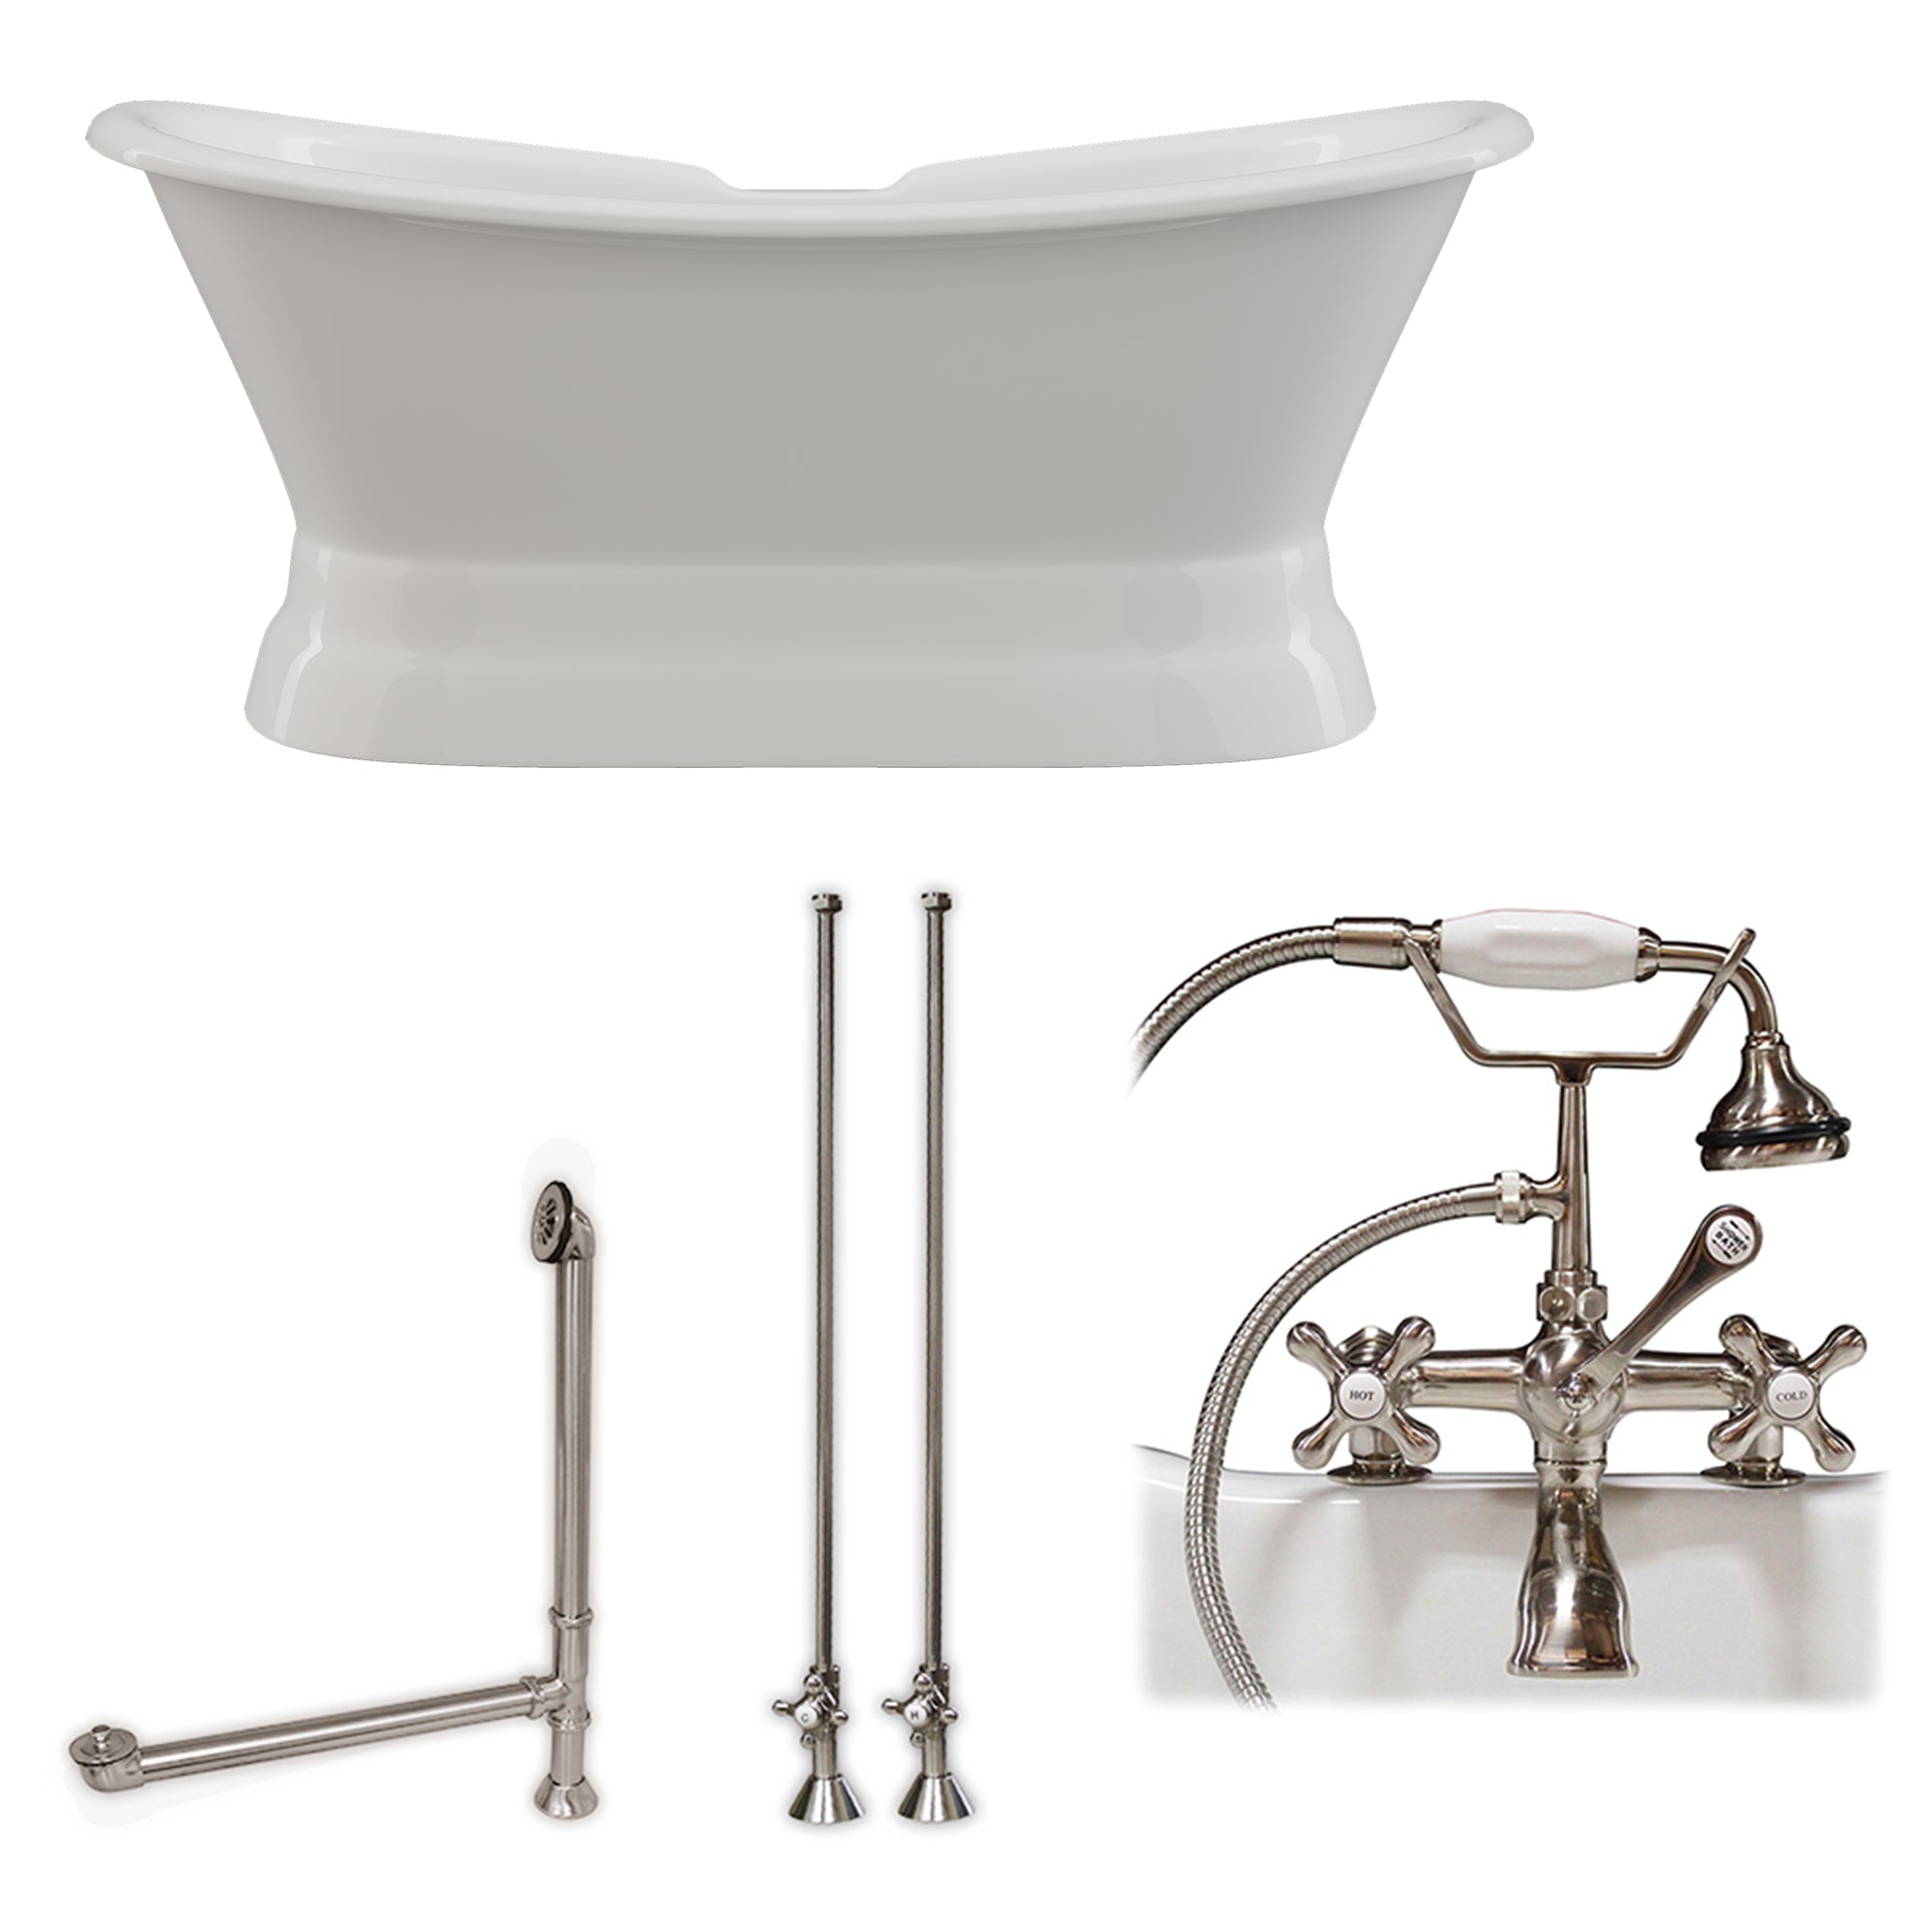 Cambridge Plumbing Double Slipper Cast Iron Soaking Pedestal Tub (Porcelain interior and white paint exterior) and Deck Mount Plumbing Package (Brushed nickel) DES-PED-463D-2-PKG-7DH - Vital Hydrotherapy